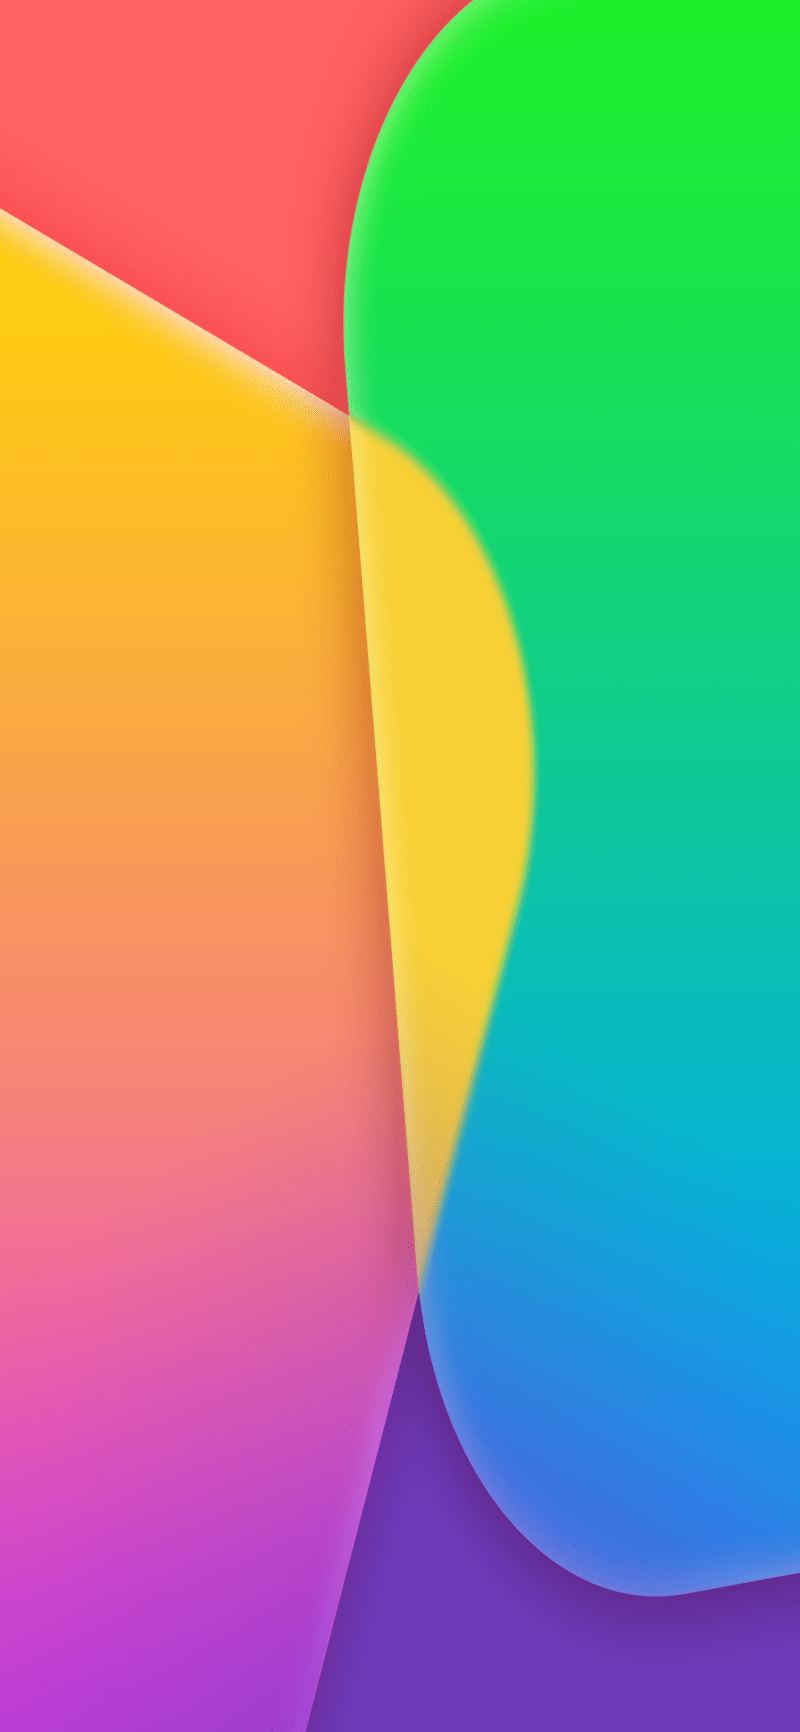 old ios wallpapers,blue,yellow,green,red,orange